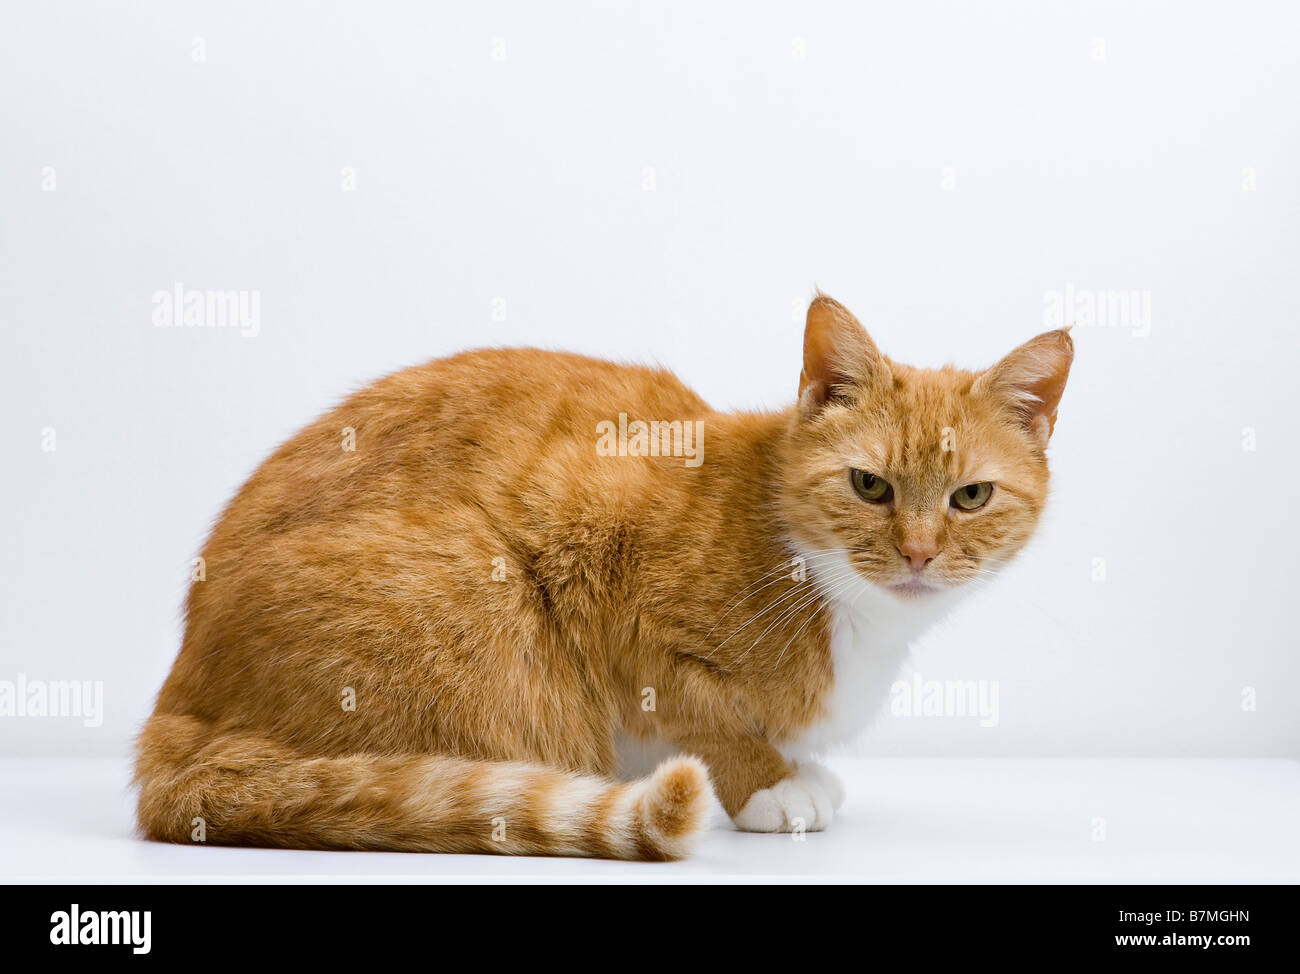 Adult ginger female cat (Felis catus) making eye contact with the camera against a white background Stock Photo